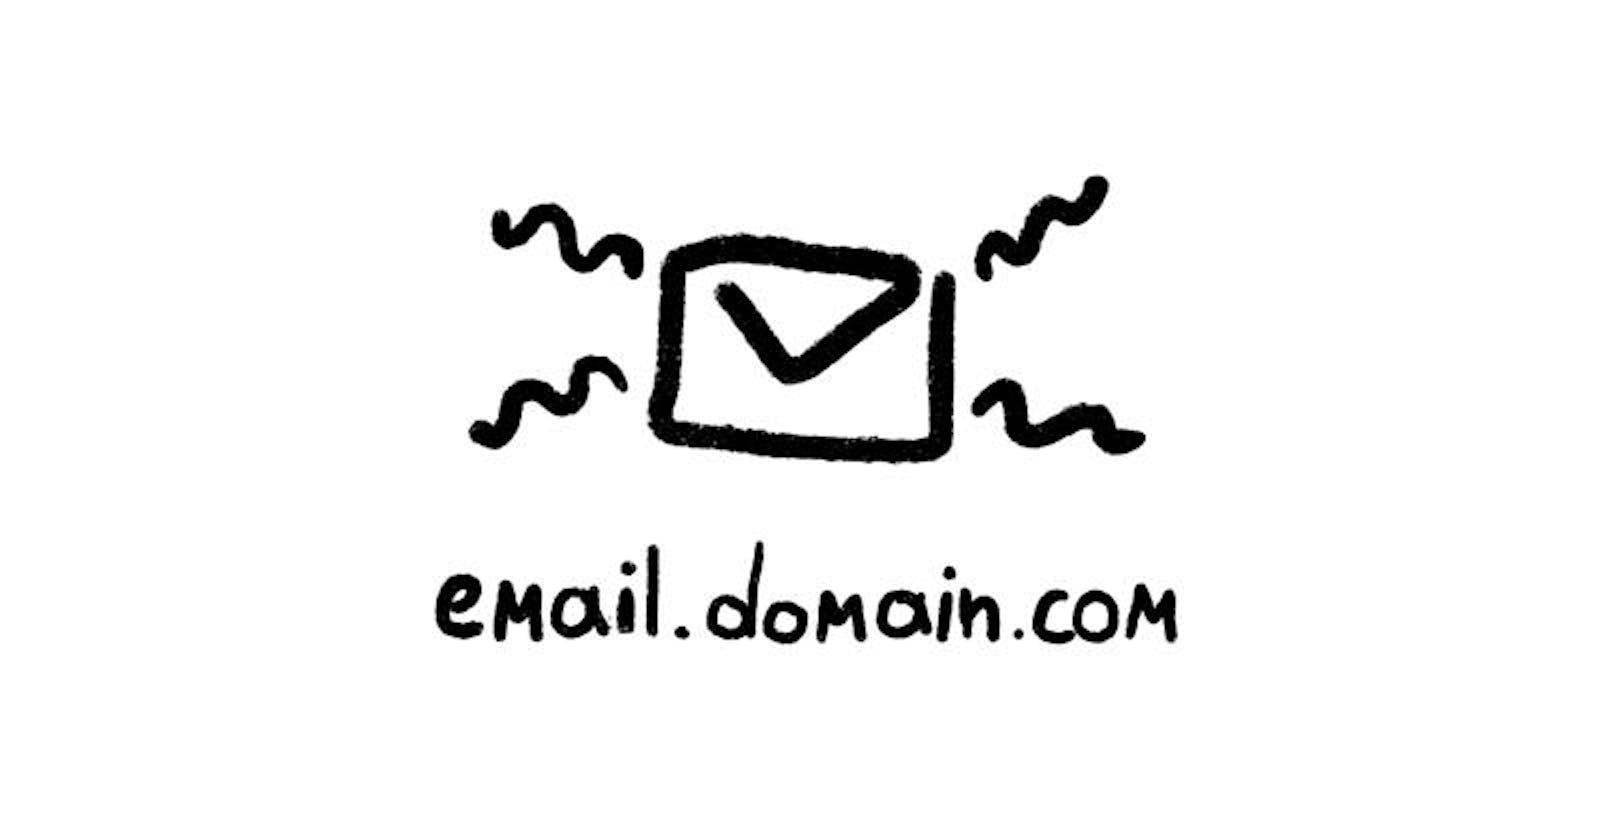 How to get a free custom email domain + hosting AND launch your first newsletter